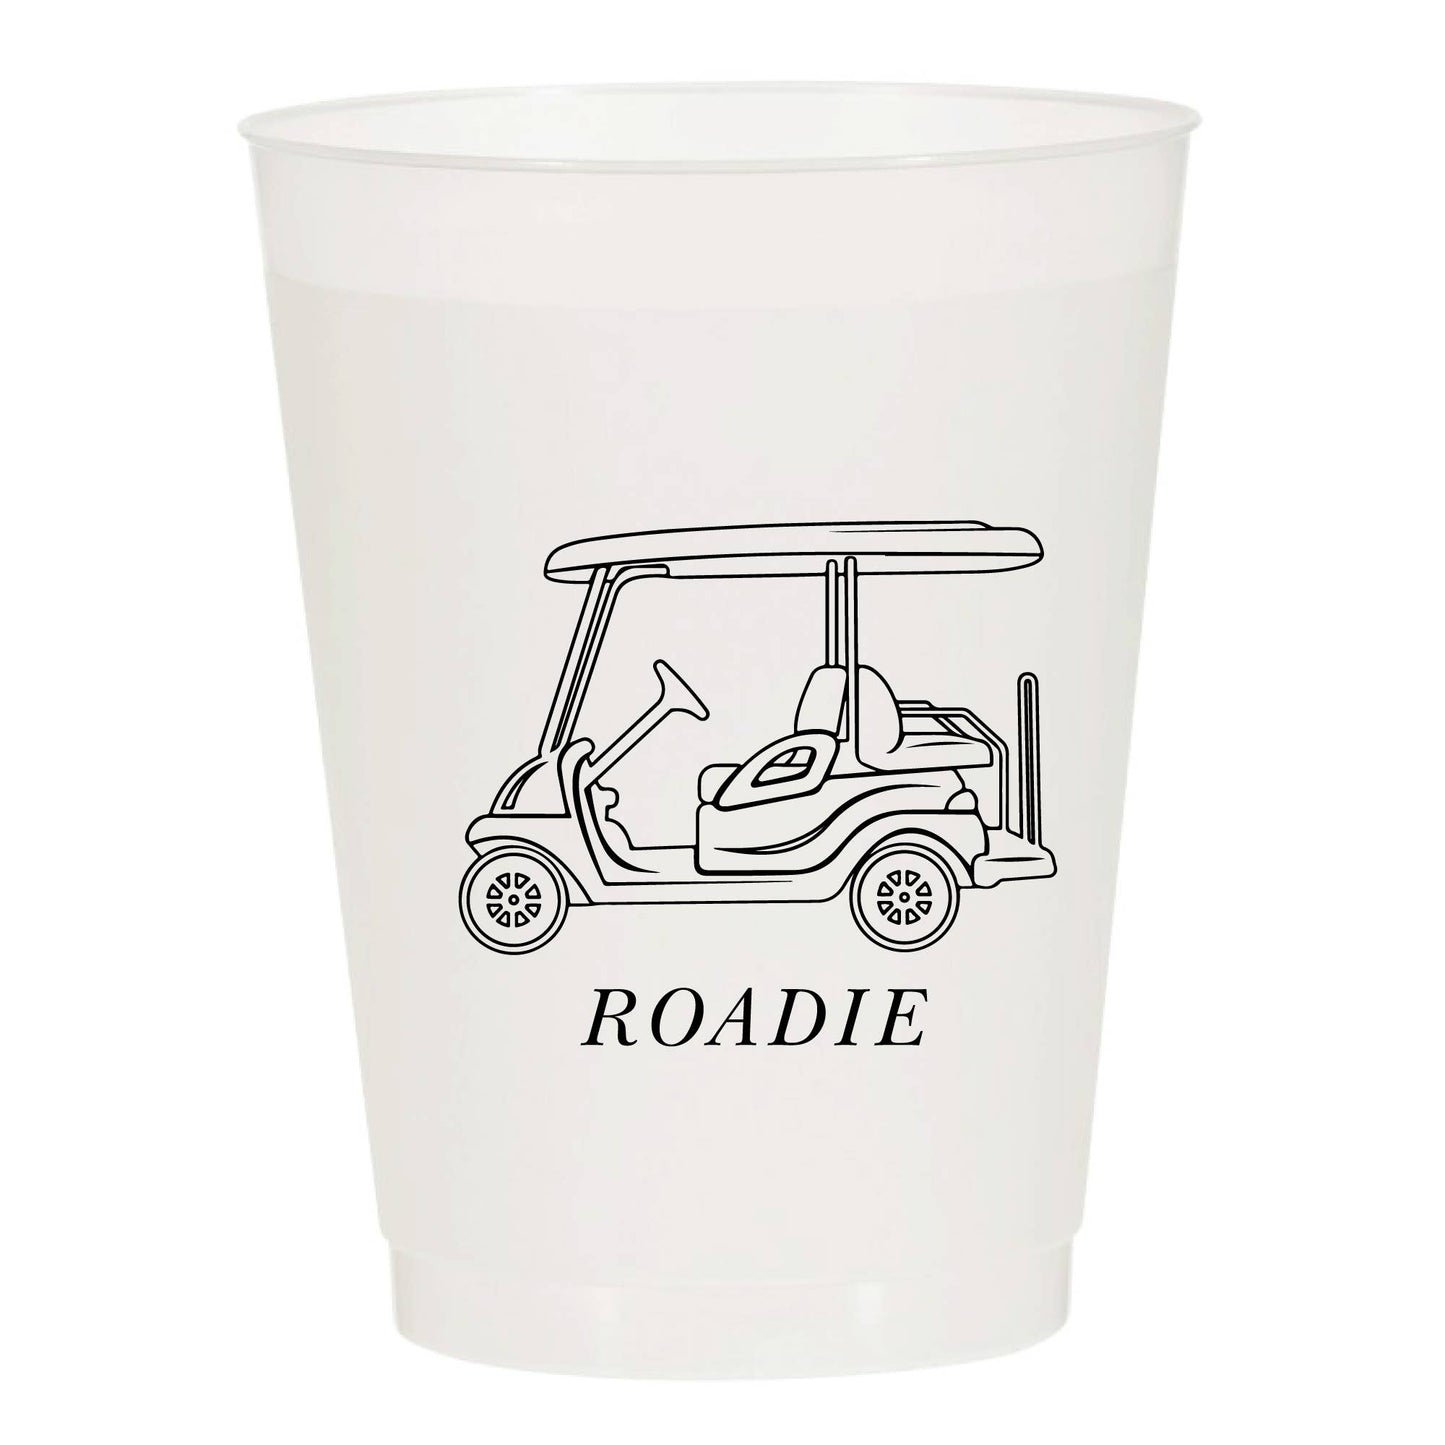 Golf Cart Roadie Masters To Go Reusable Cup - Set of 10 Cups